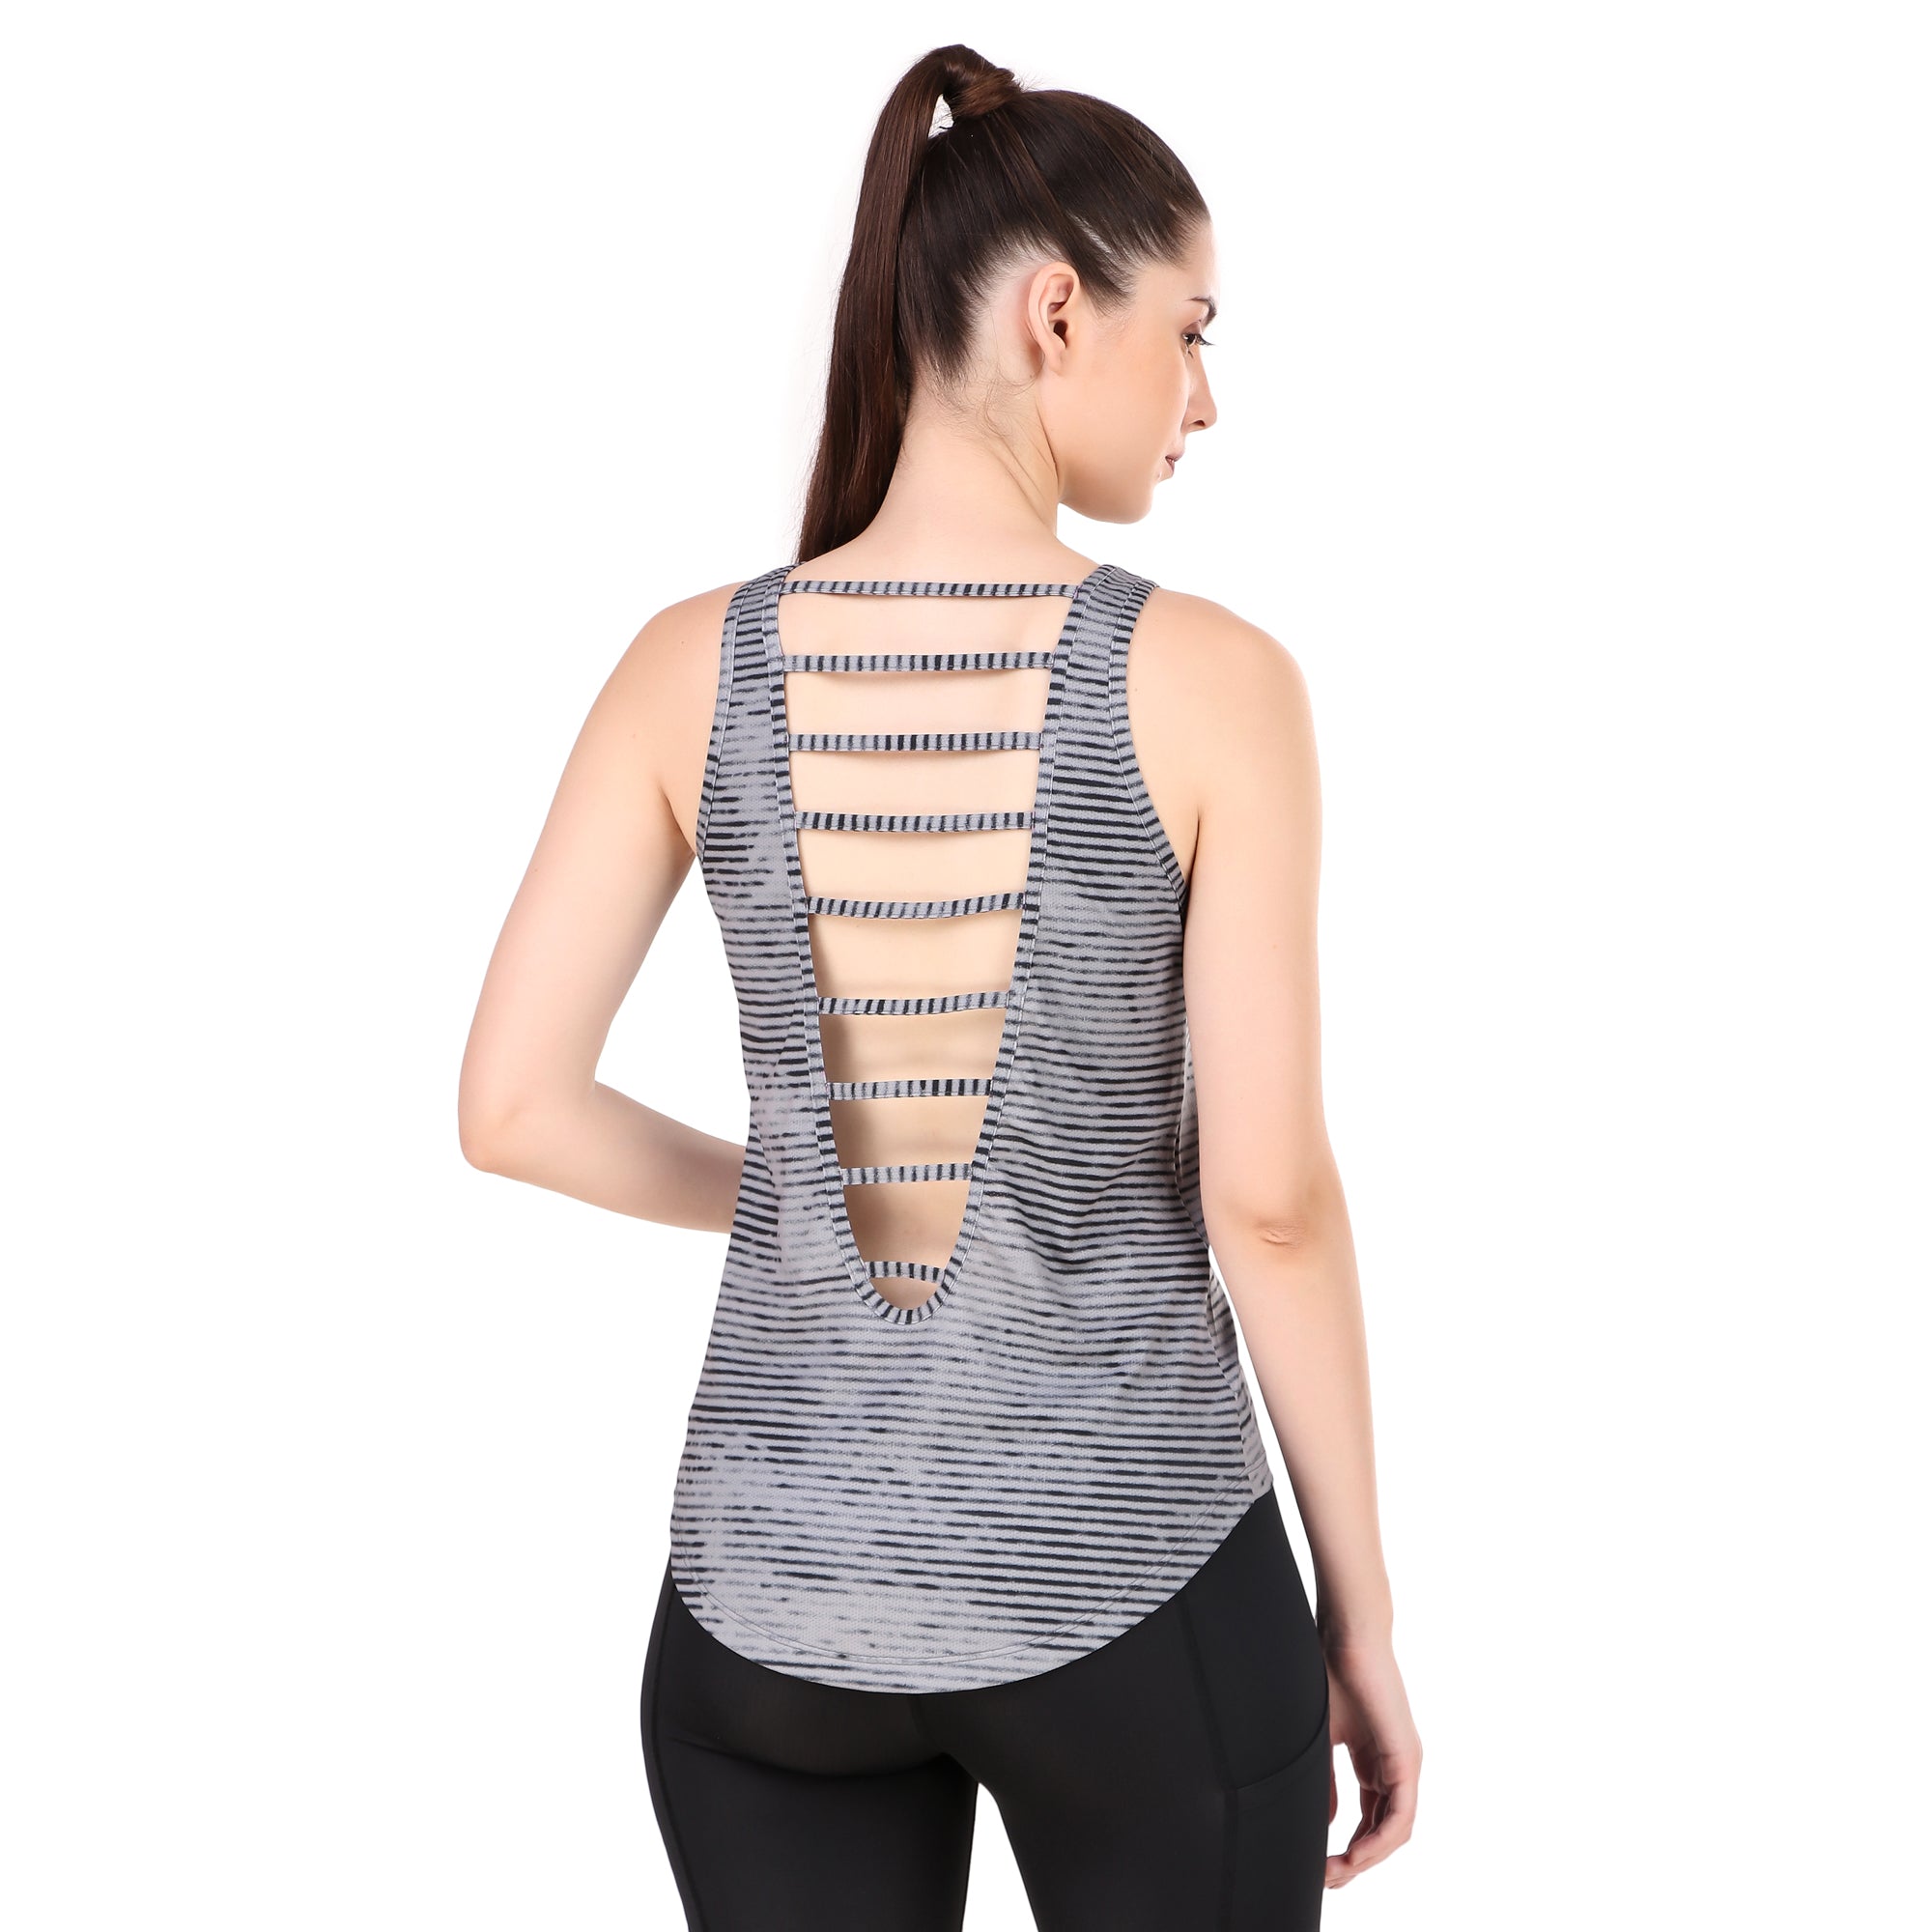 Chic Back Cut Sleeveless Tshirt For Women (Abstract Grey)